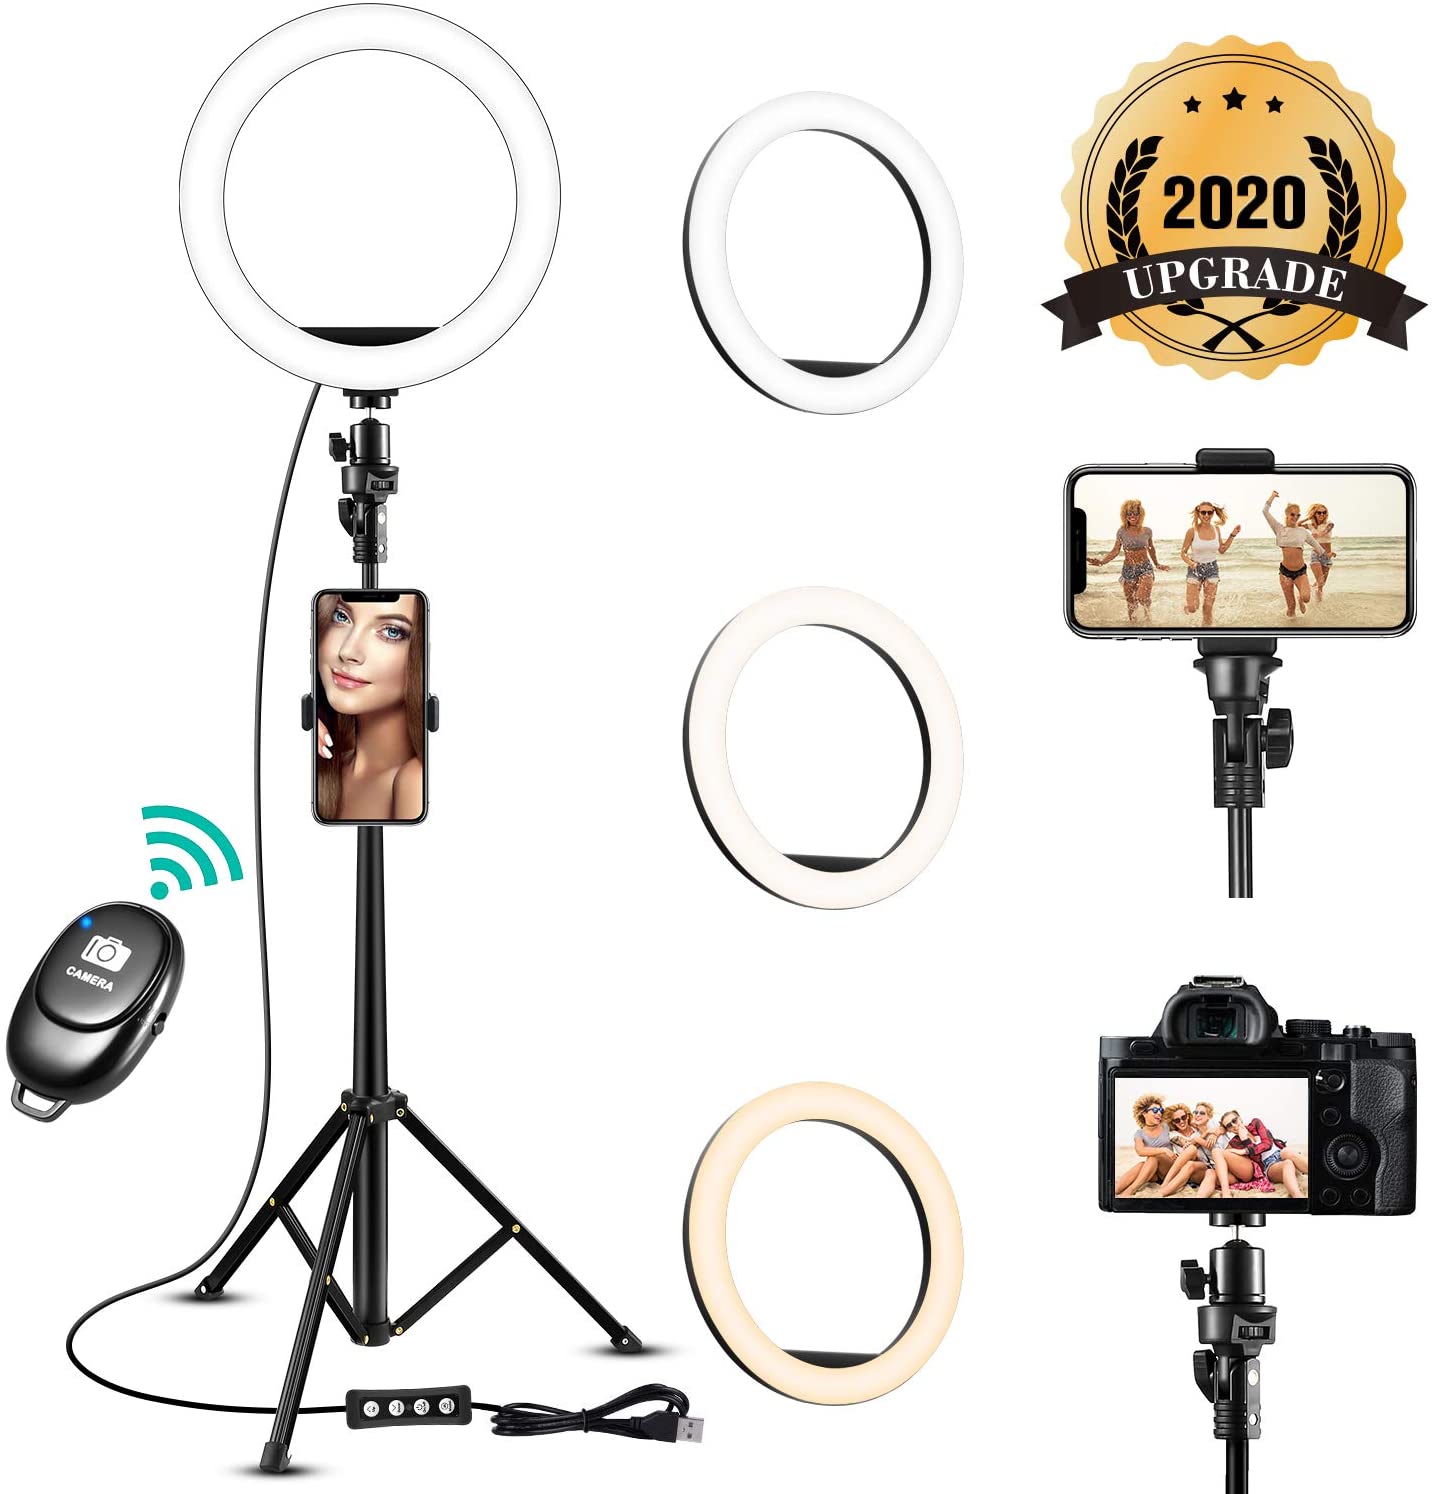 TODI Upgraded Dimmable Camera Ring Light for iPhone